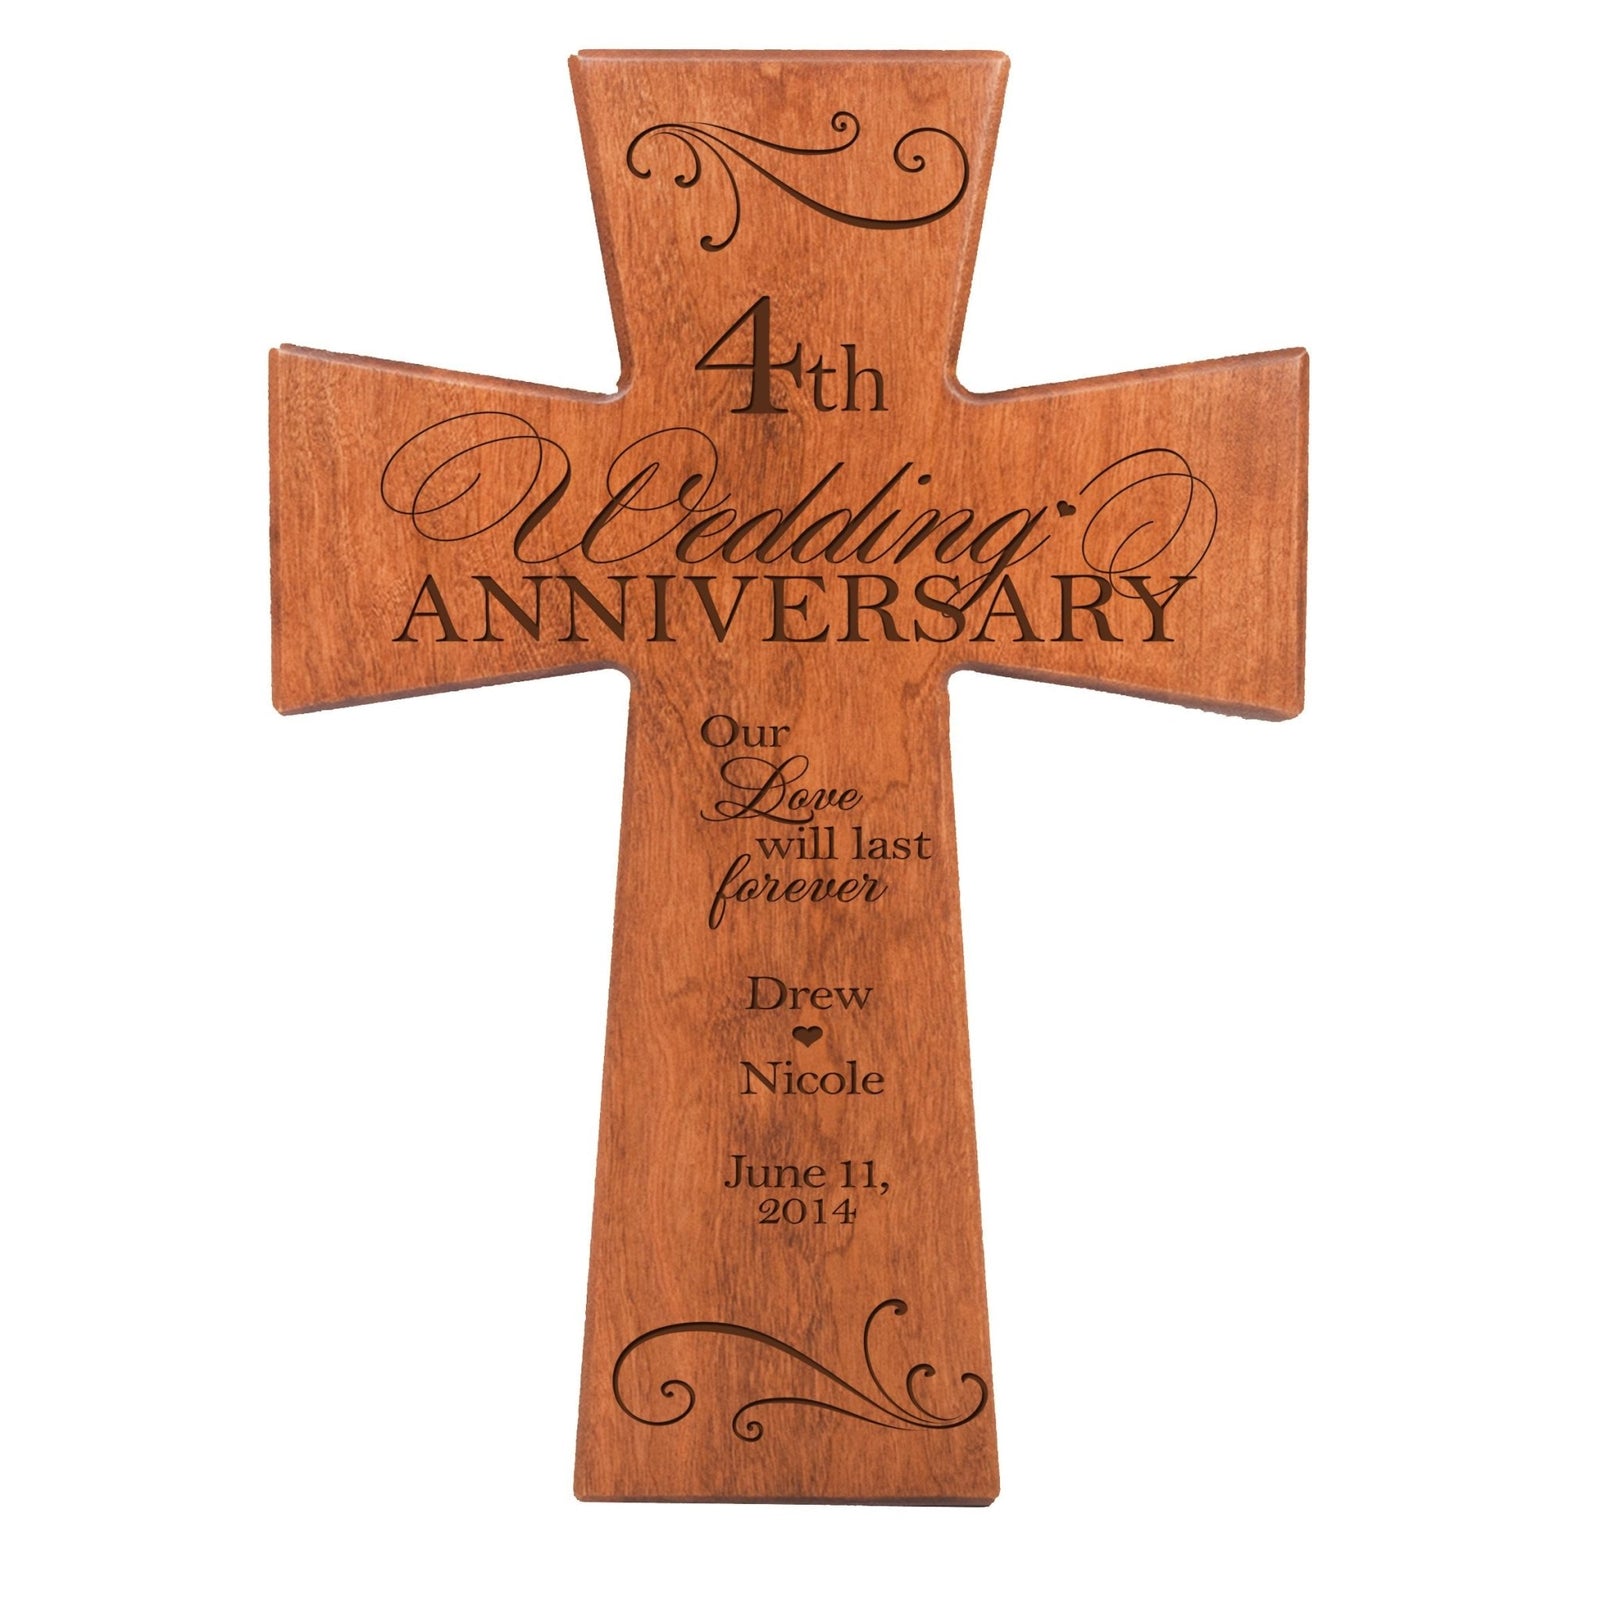 Personalized Wall Cross for 4th Wedding Anniversary - Our Love Will Last